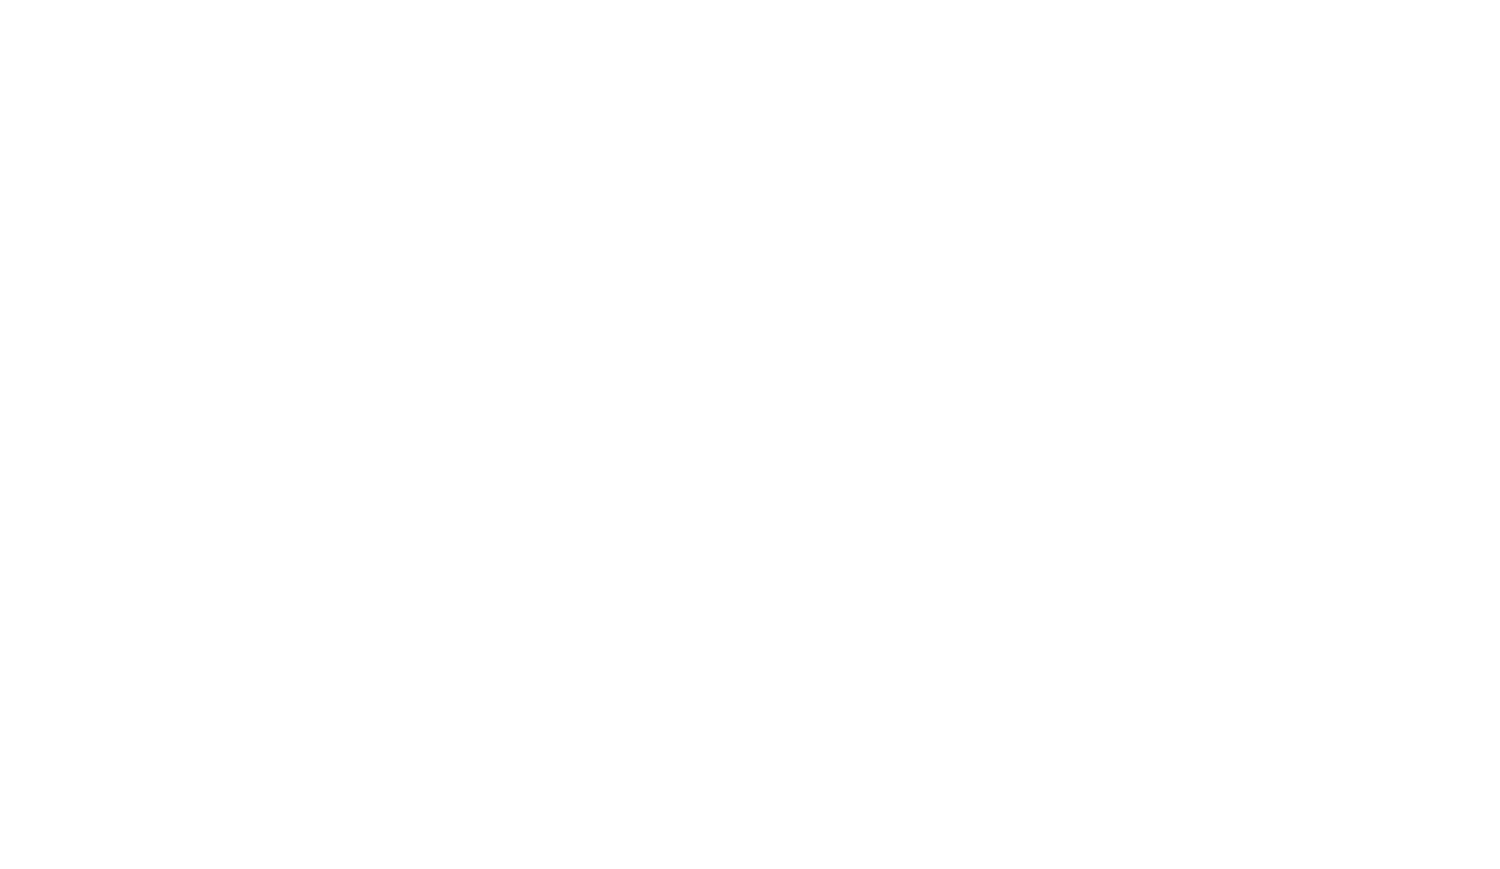 First Things First Porter County